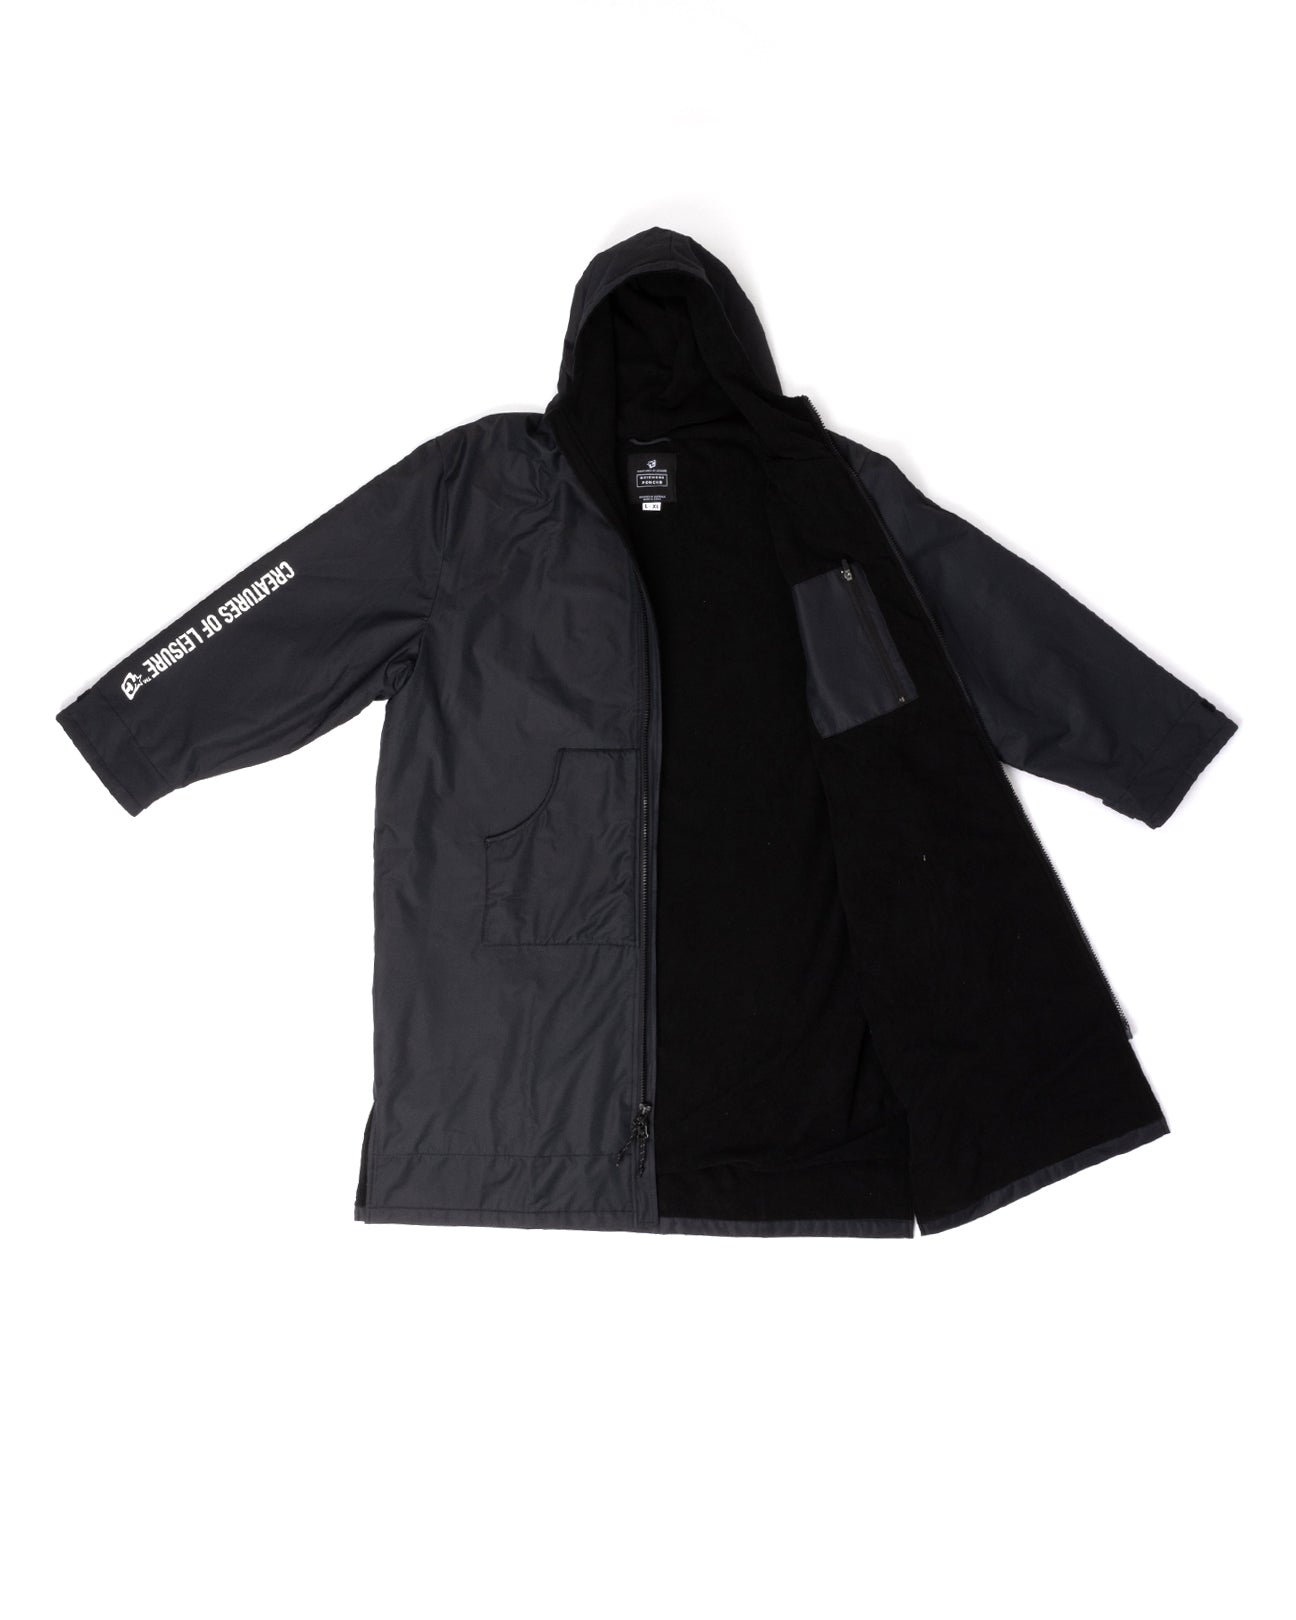 CREATURES OFFSHORE PONCHO